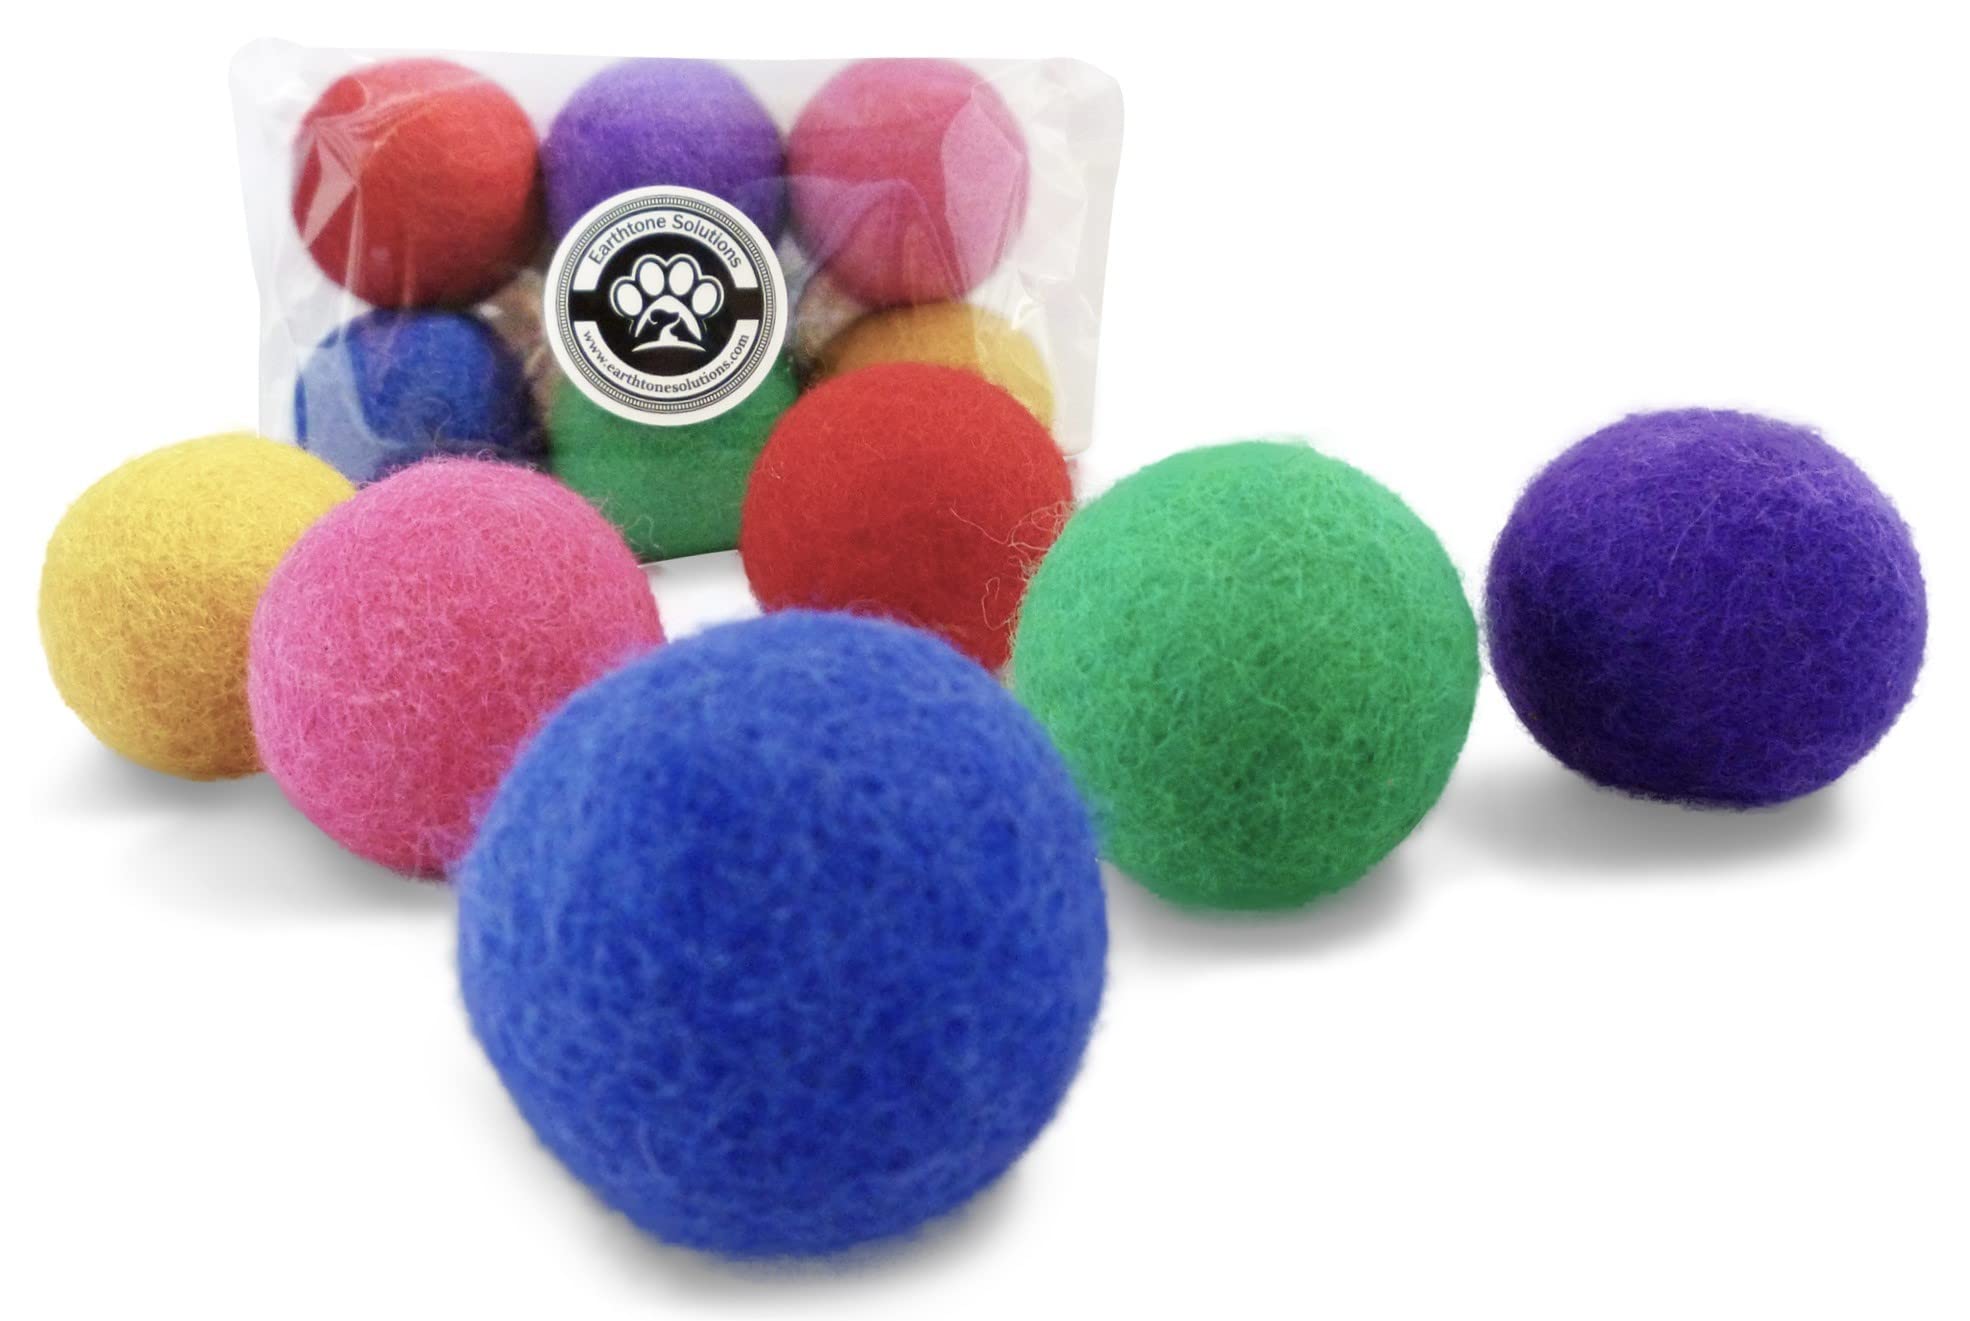 Earthtone Solutions Wool Felt Ball Toys for Cats and Kittens, Fun Adorable  Colorful Soft Quiet Felted